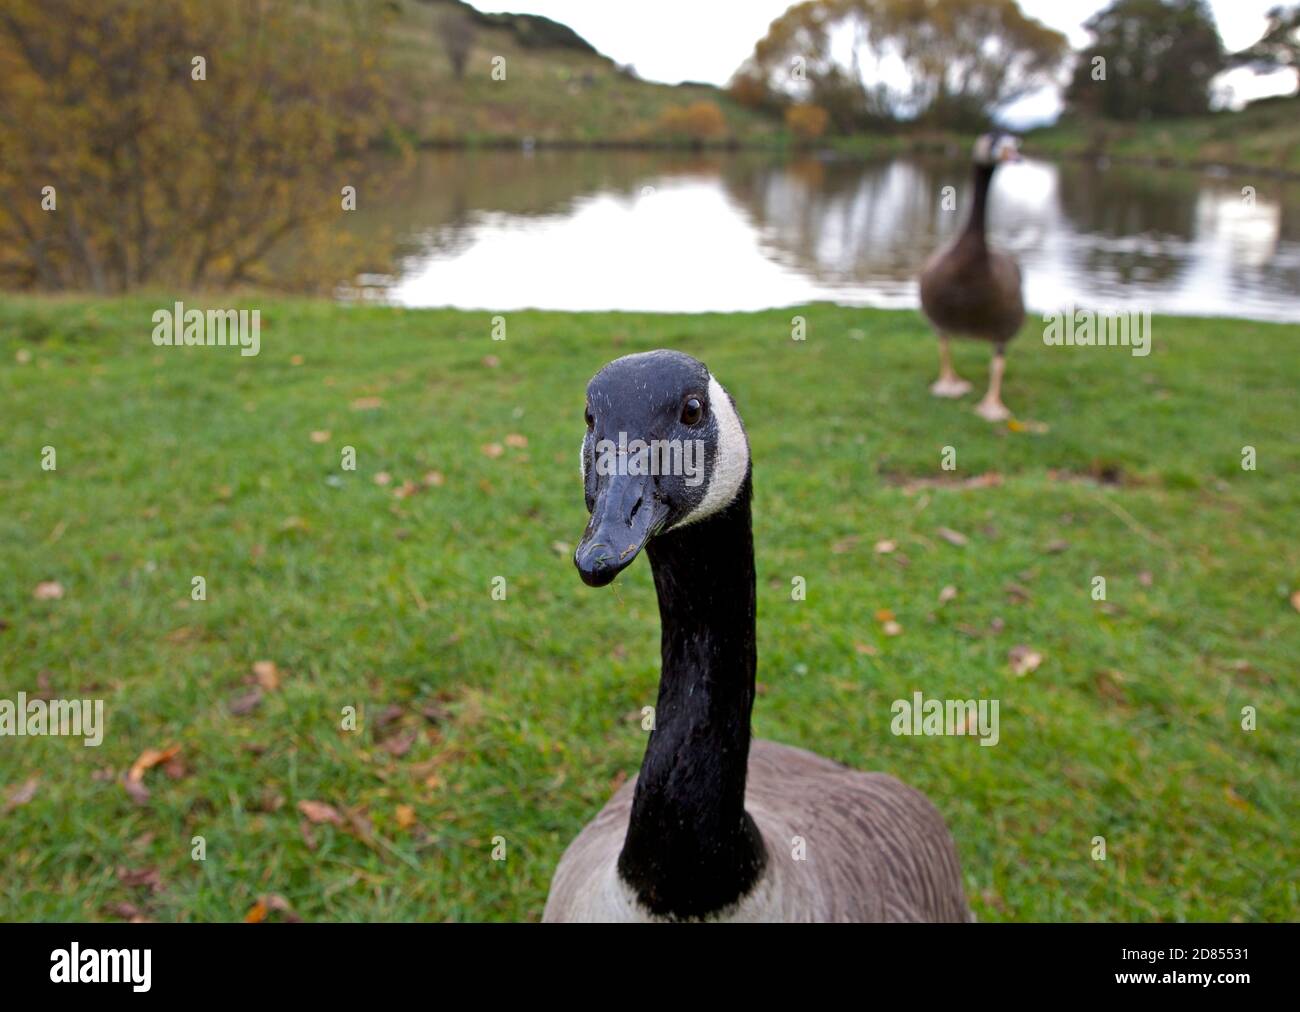 Holyrood Park, Edinburgh, Scotland, UK. 27 October 2020. Temperature of 8 degrees centigrade and leaden grey skies before heavy rain later at the park in the city centre. Avian activity around the loch . Pictured: Canada Goose approaches camera to stare into the lens. Stock Photo